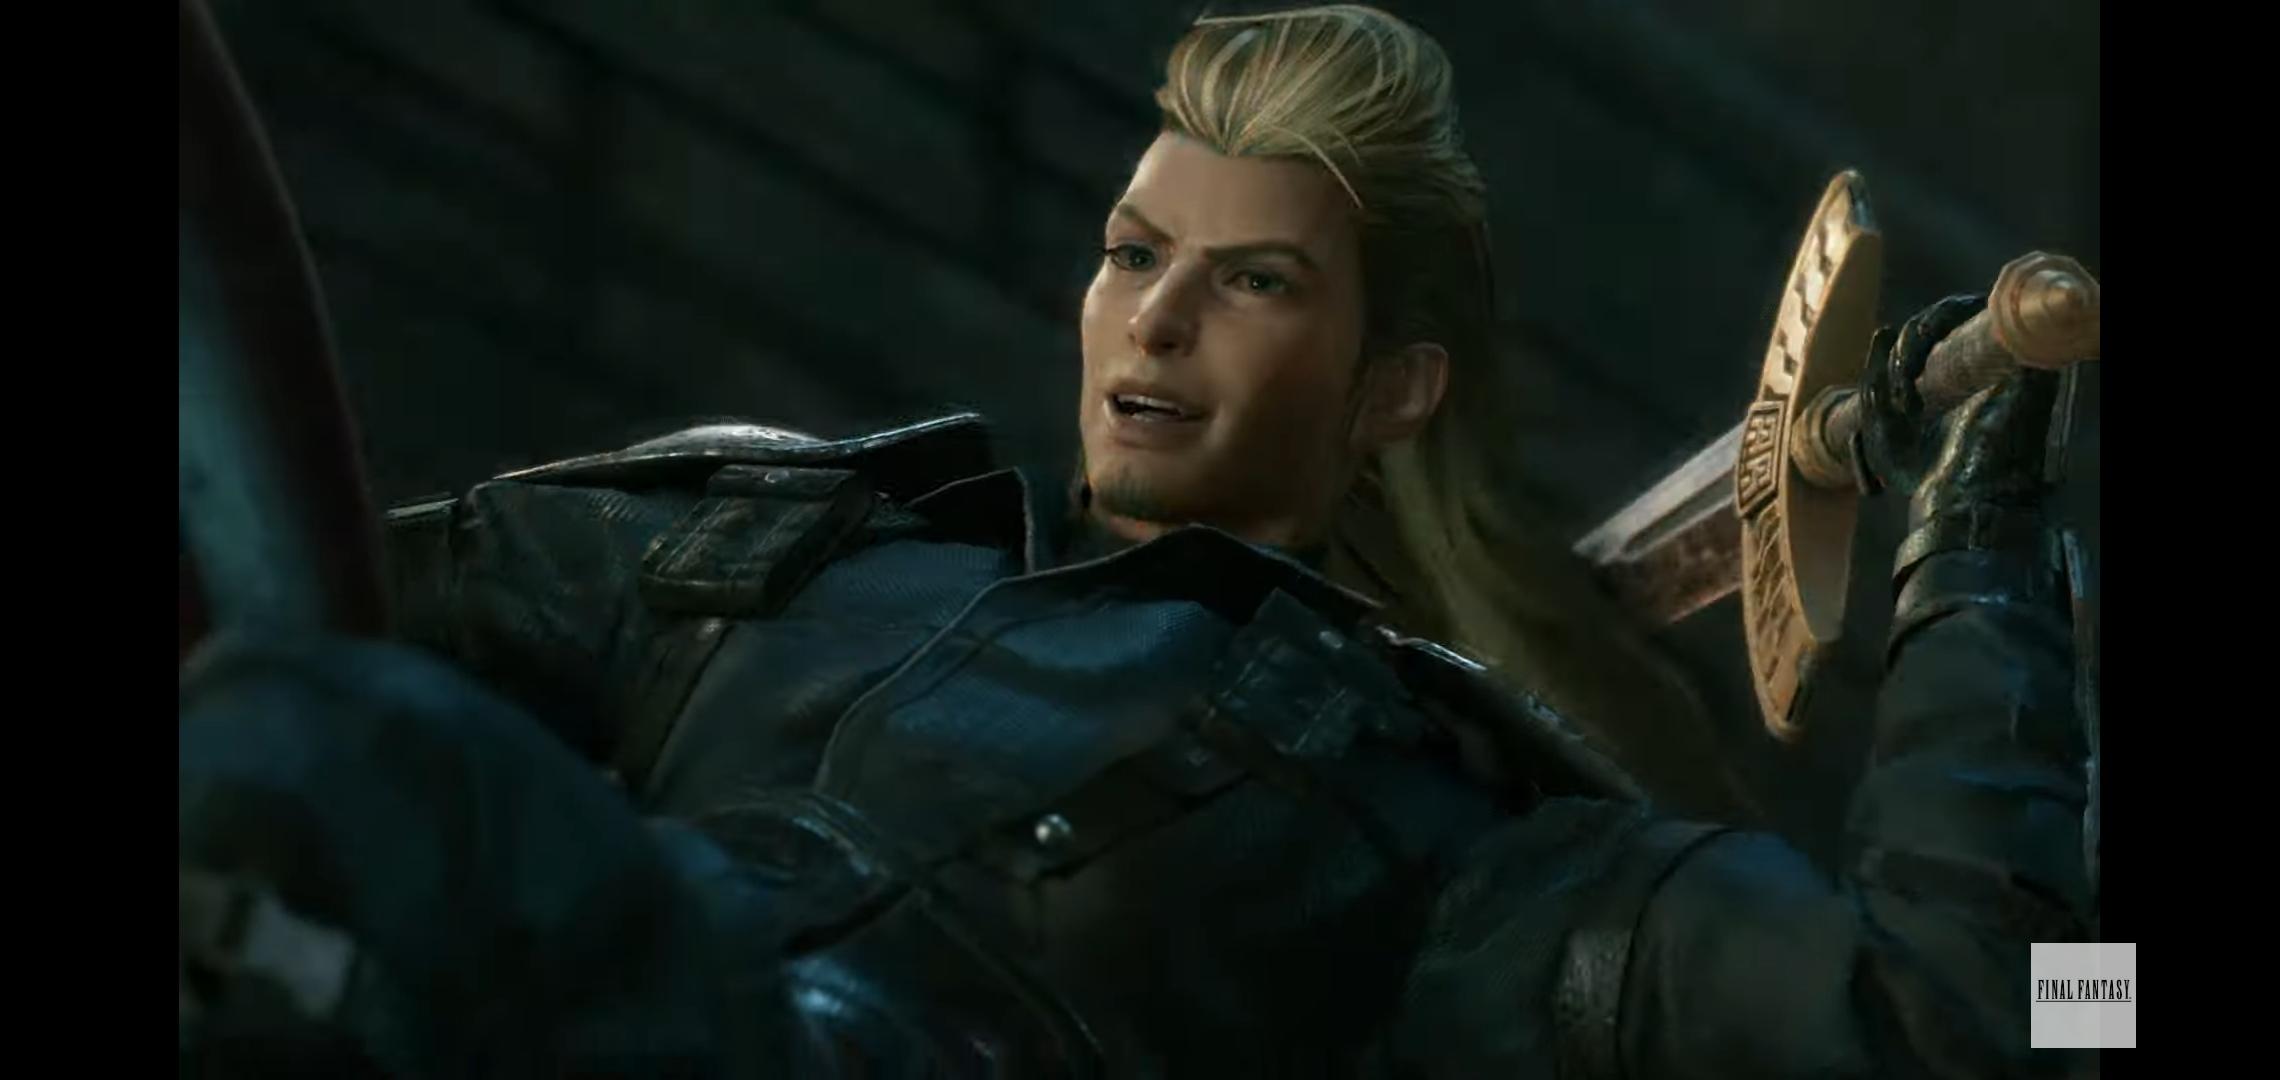 New SOLDIER Character. Final Fantasy VII